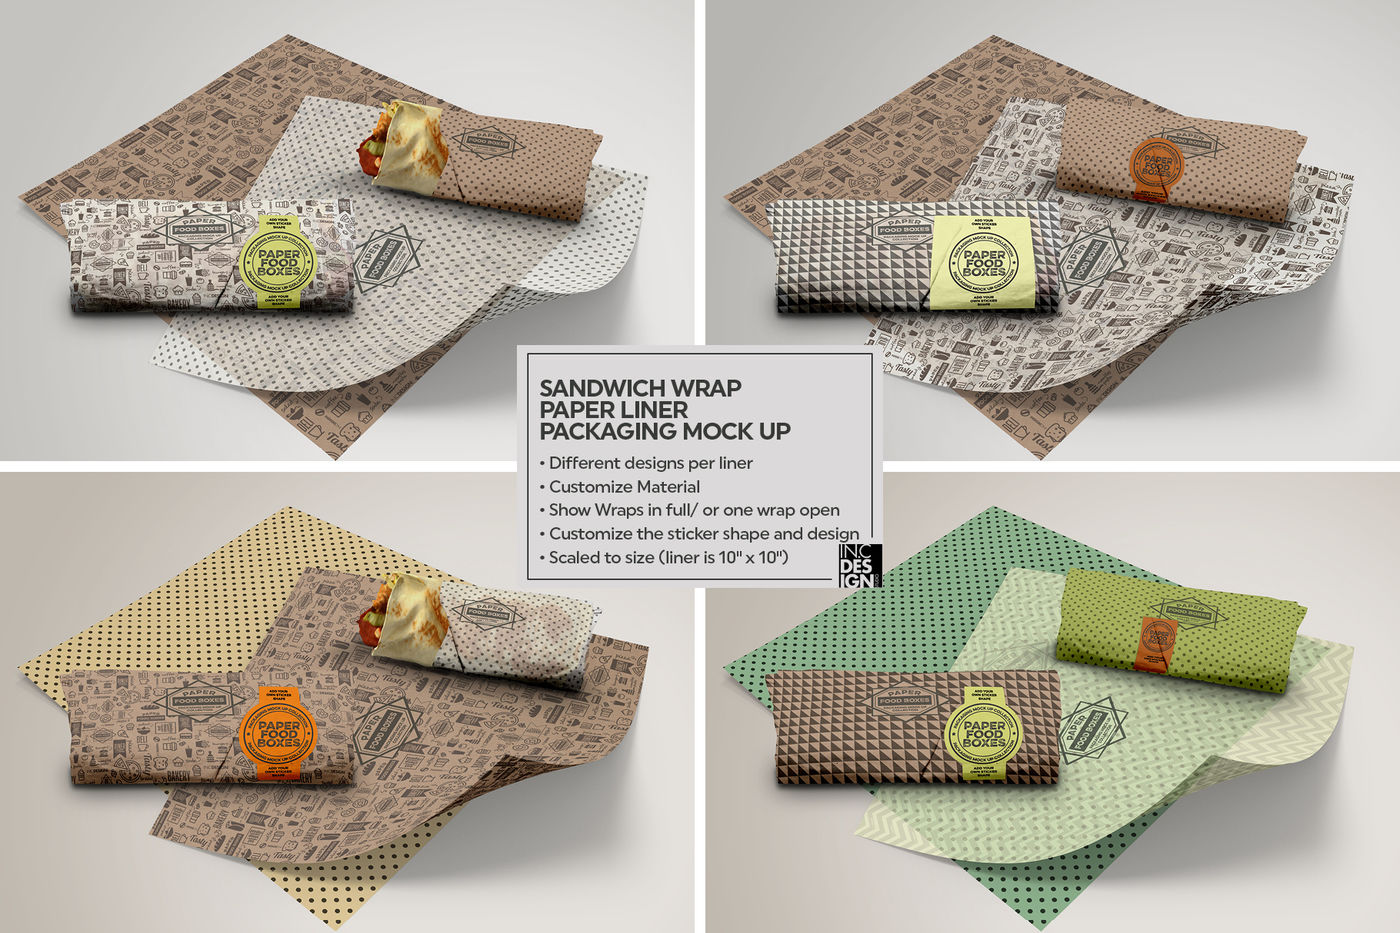 VOL 10: Paper Food Box Packaging Mockup Collection By INC Design Studio